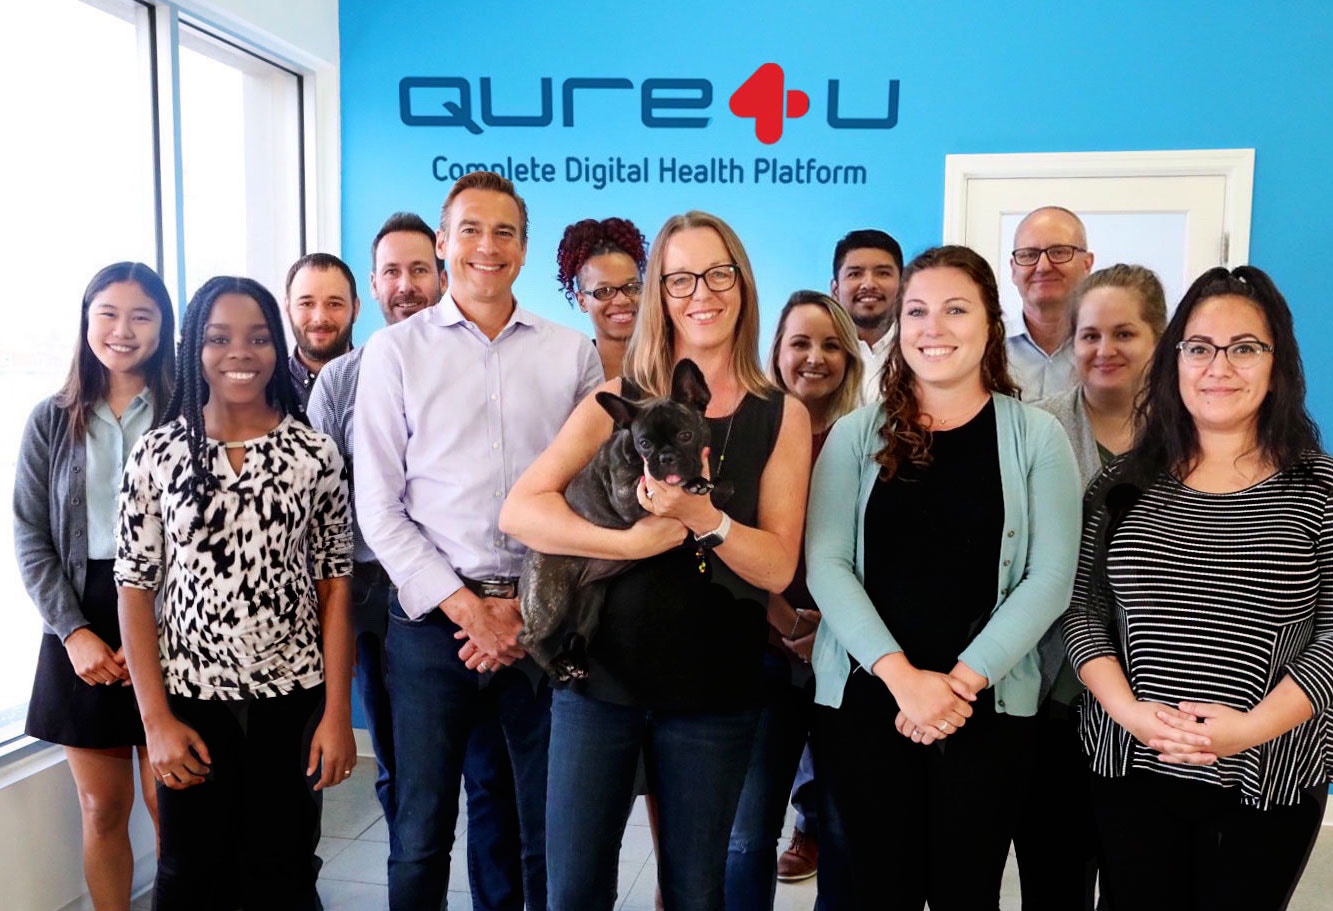 Why We Invested in Qure4U